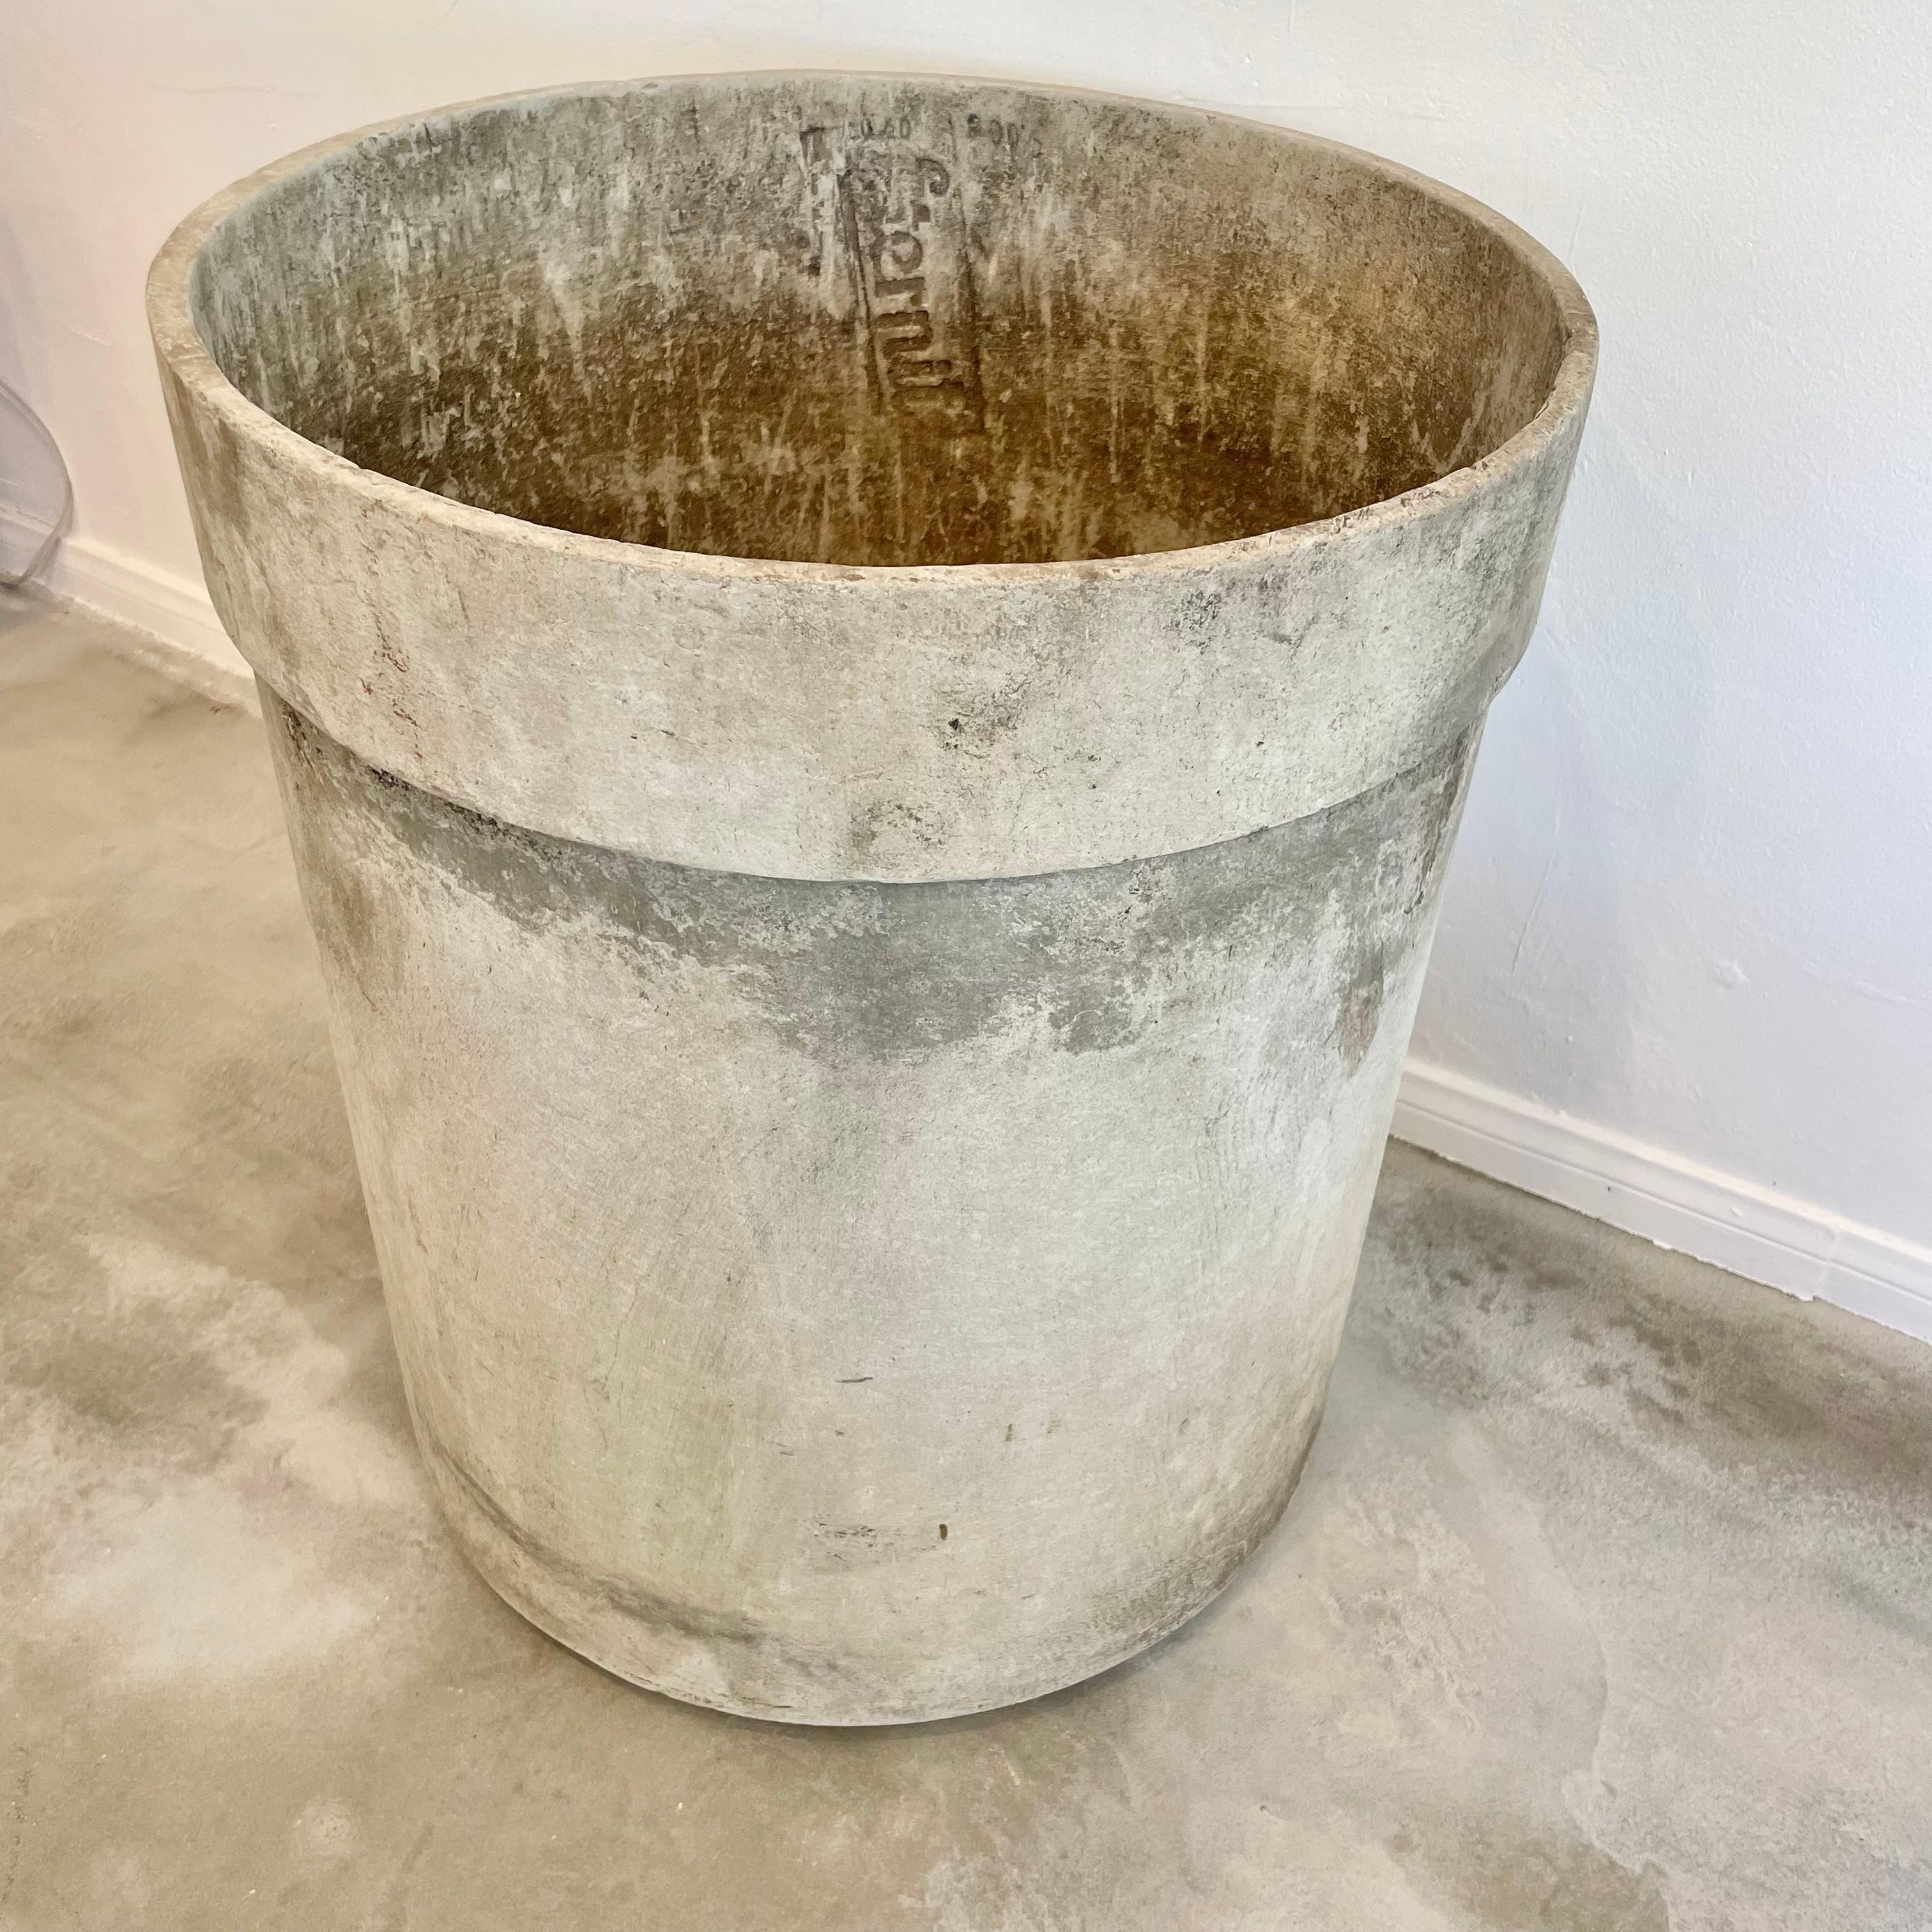 Oversized Willy Guhl concrete planter by Eternit, 1960s. Handmade in Switzerland. Perfect for a large tree. Just over 2 feet in diameter. Very unusual and hard to find size. Excellent condition. Perfect patina. Only one available. 

